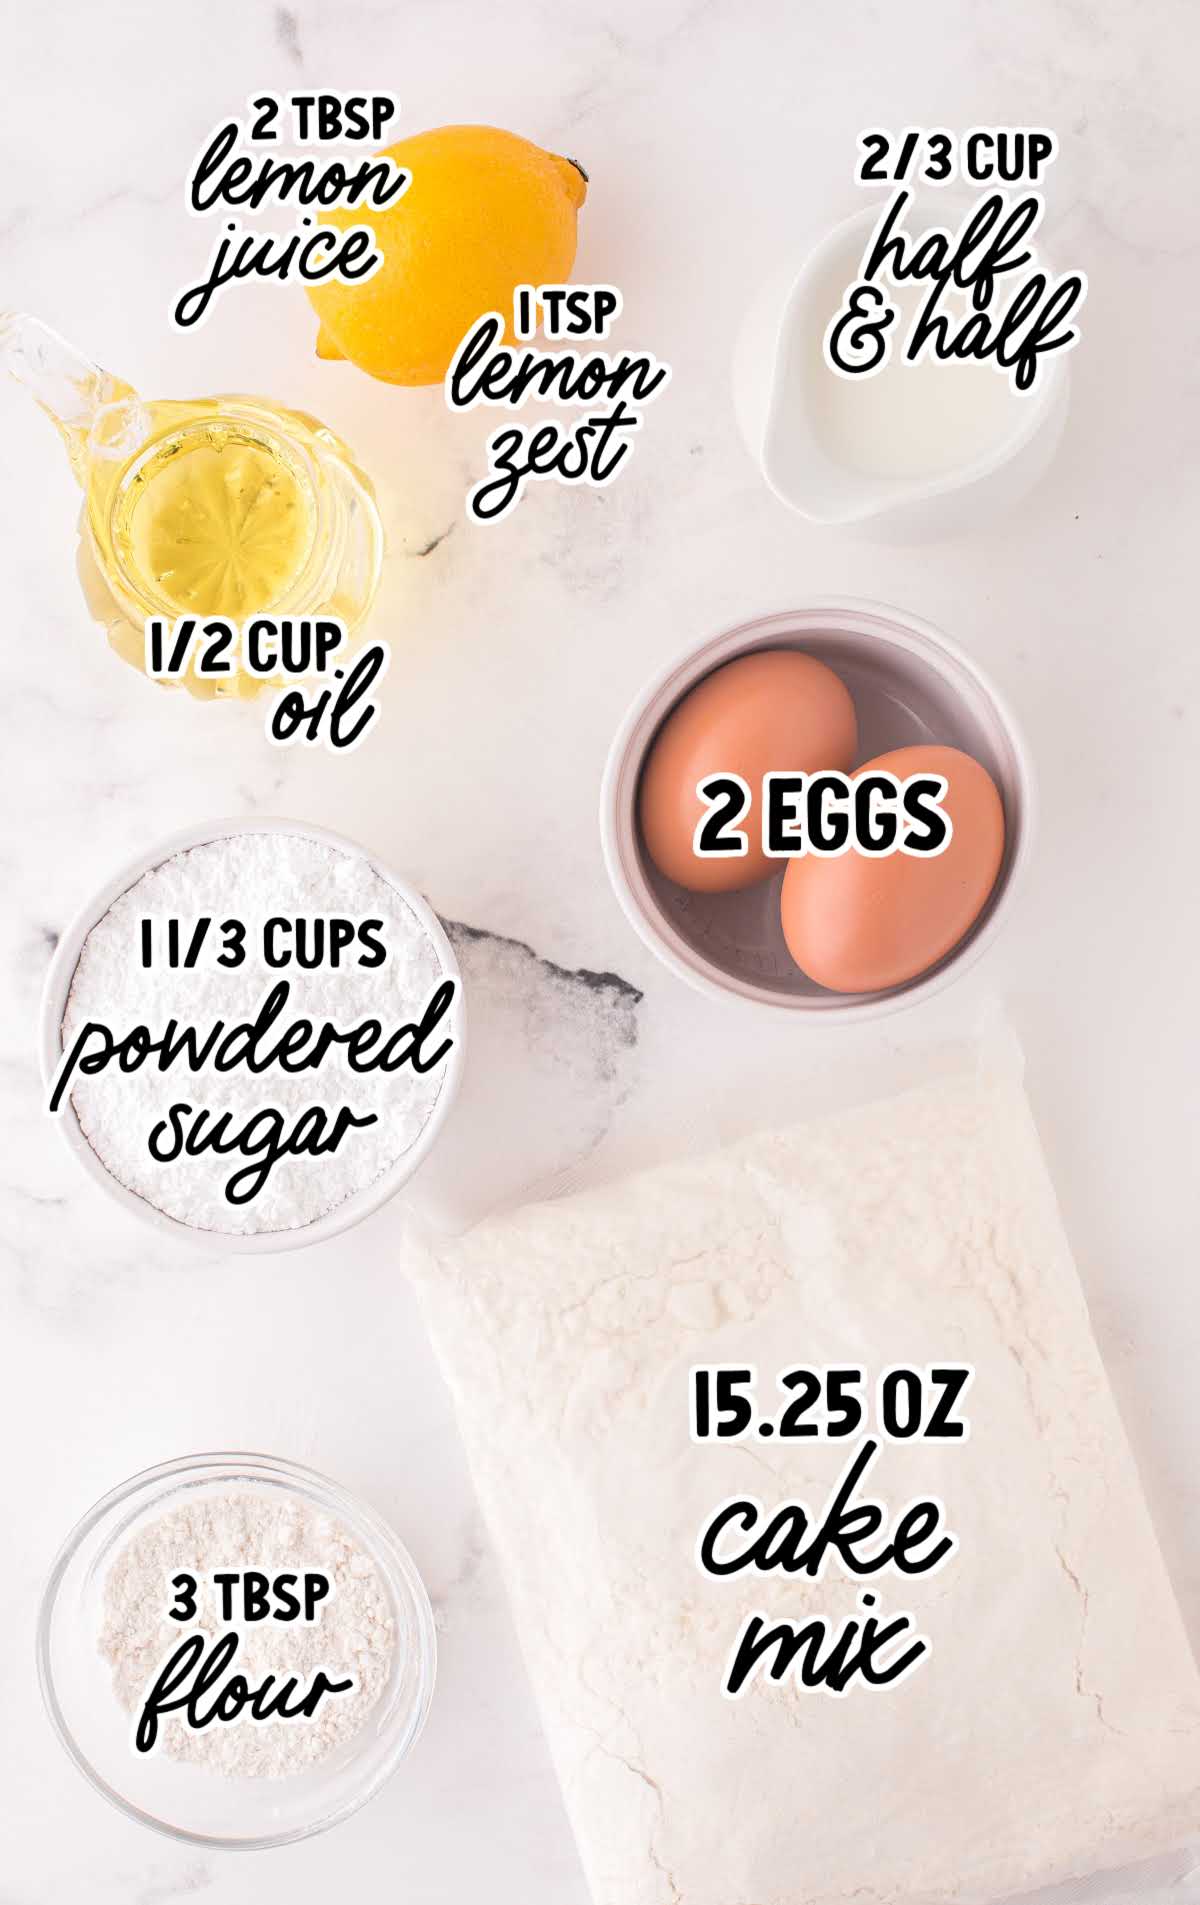 Cake Mix Muffins raw ingredients that are labeled